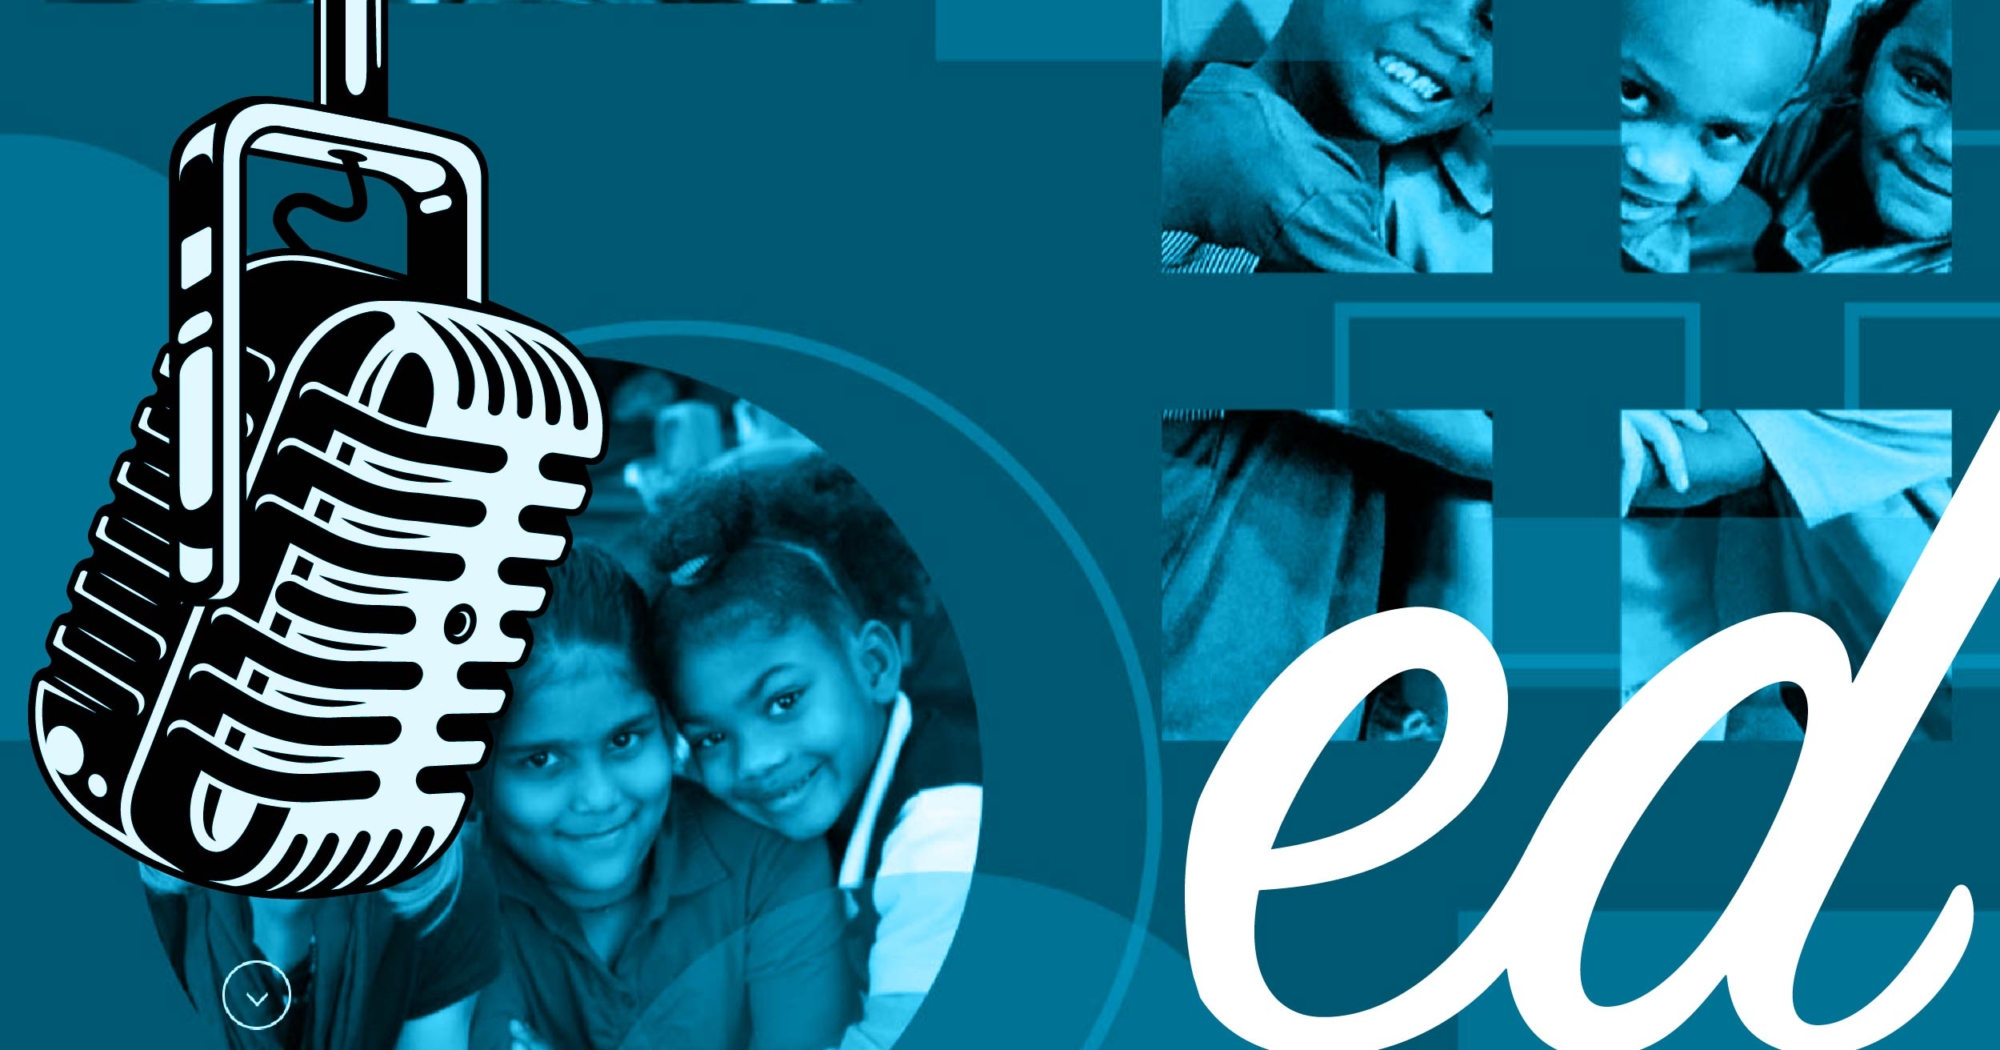 ep-394-what-s-up-with-diverse-charter-school-coalition-edchoice